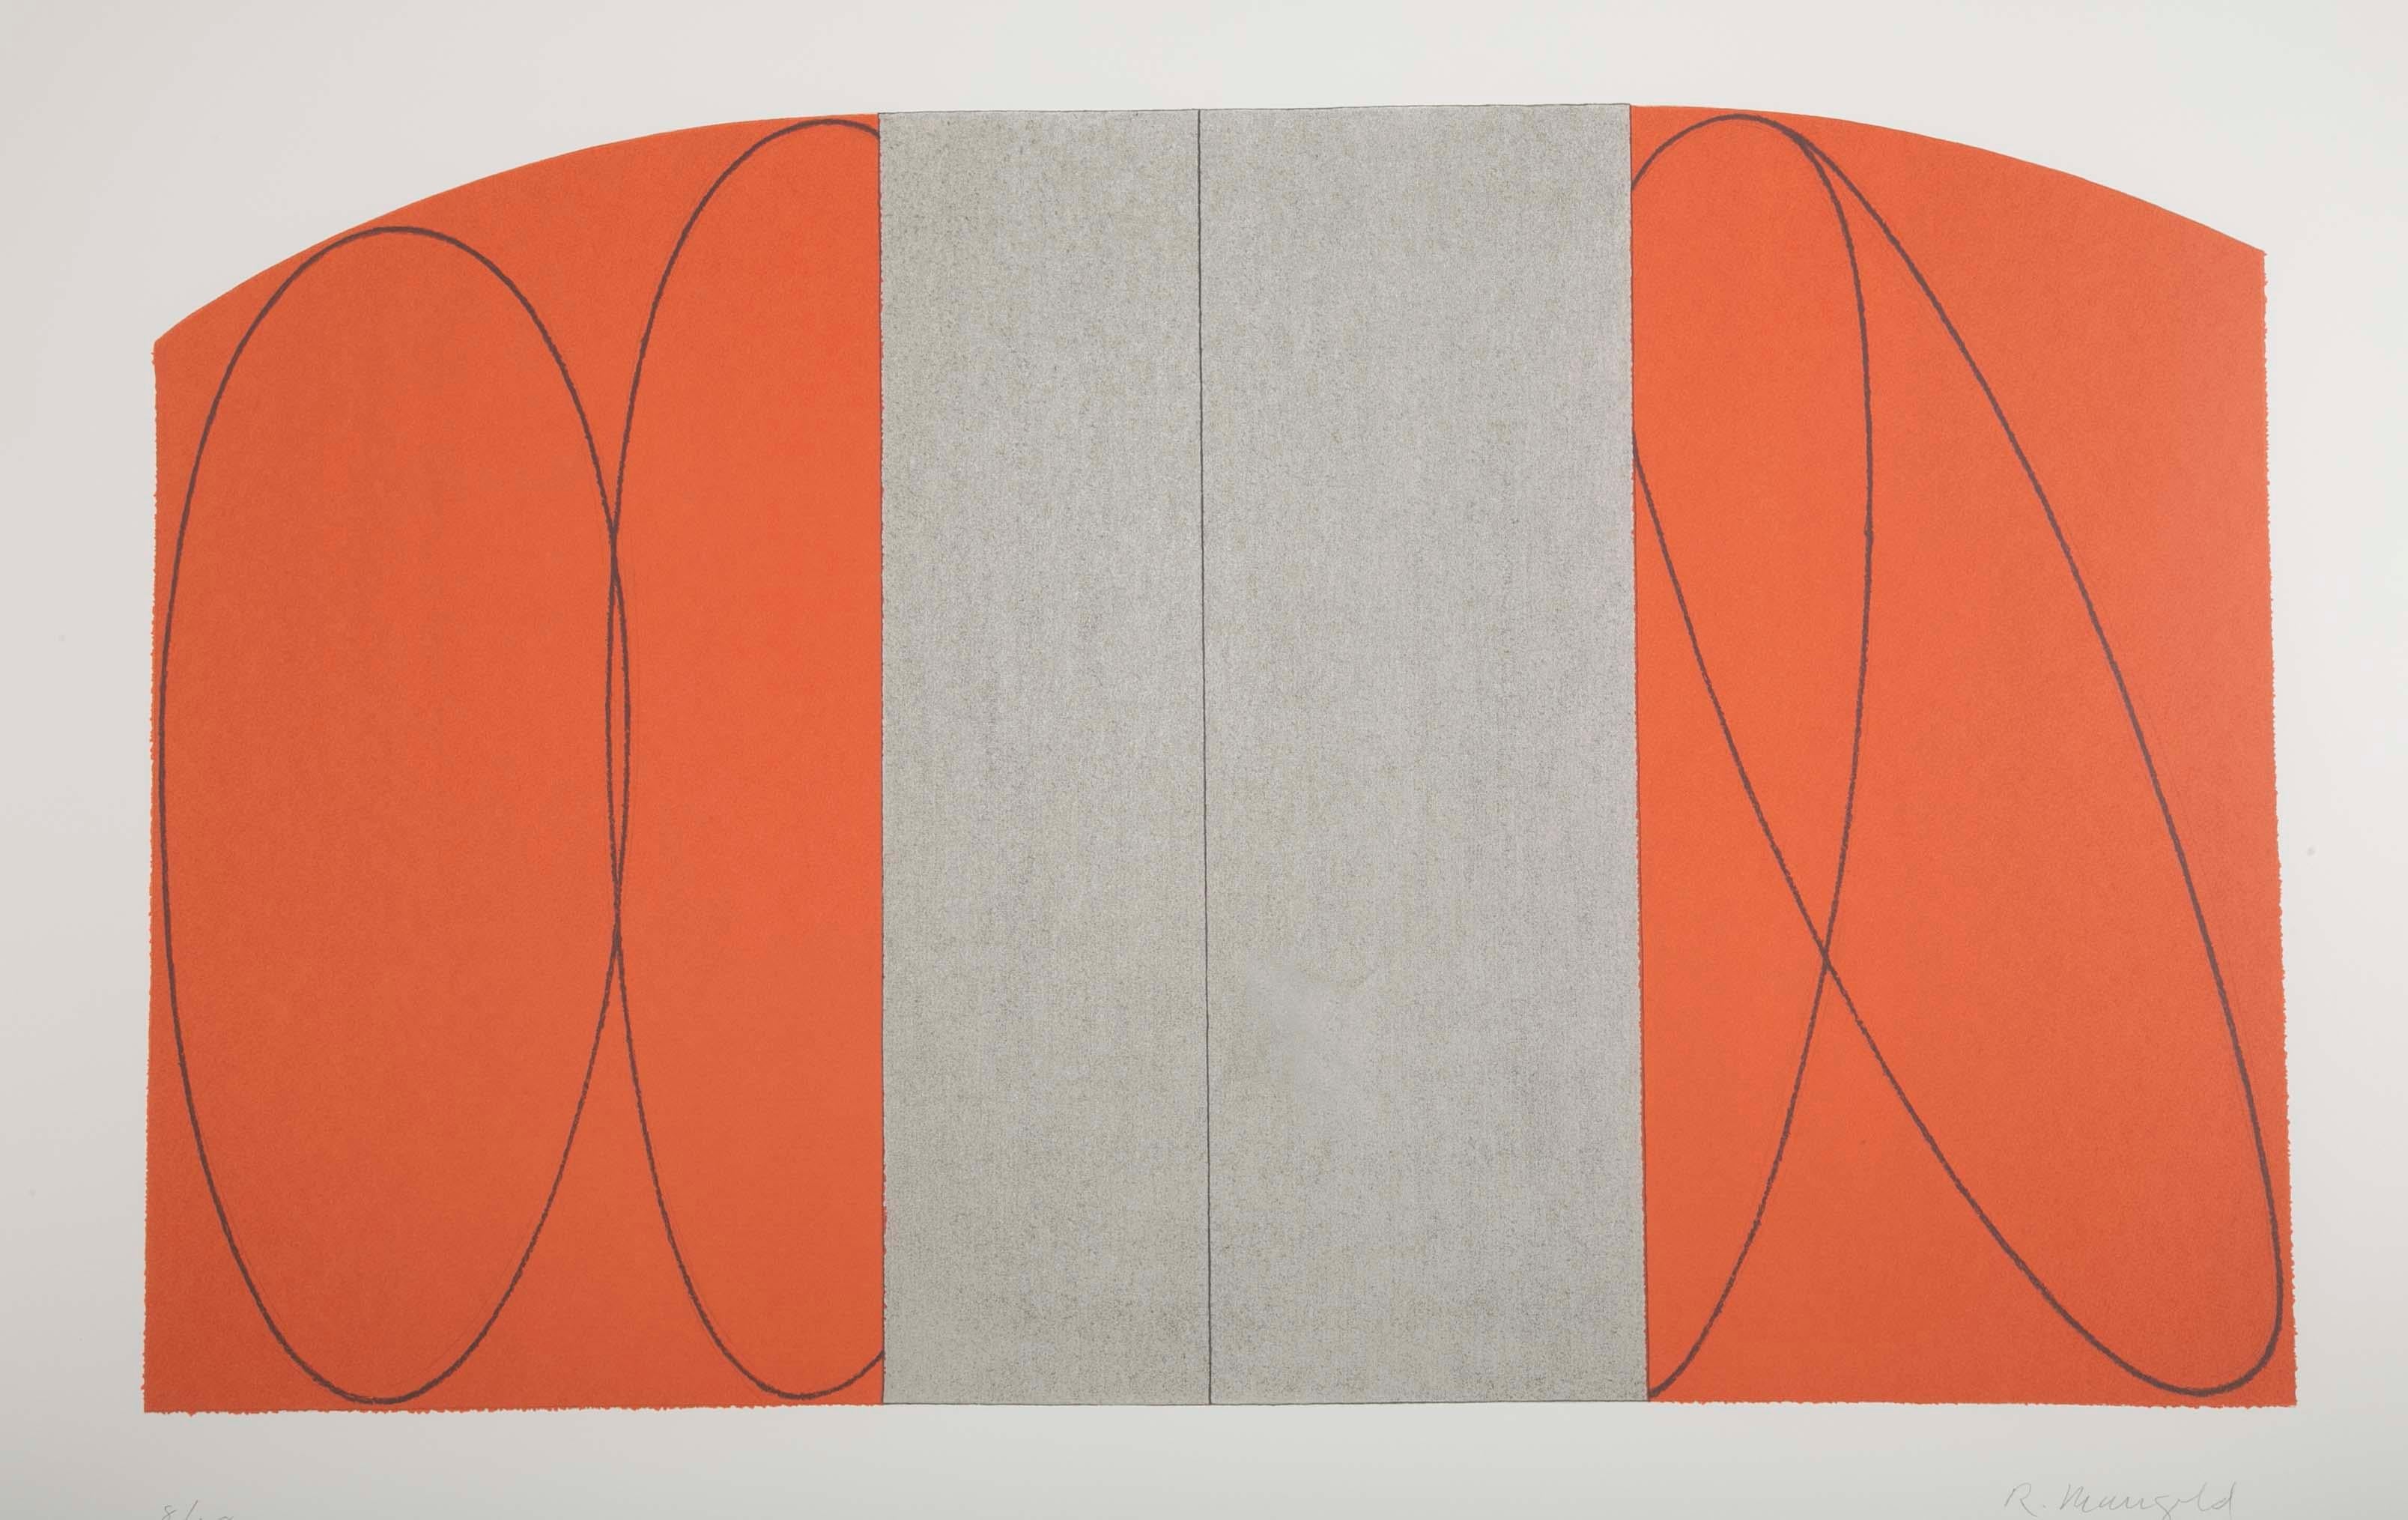 Untitled (Red/Gray Zone), 1997.
Screen-print in colors, on Somerset paper, with full margins signed and numbered. Published by Lincoln Center List Poster and Print Program, New York,
Edition of 108, signed and numbered
Sheet/paper: 31 1/2 x 45